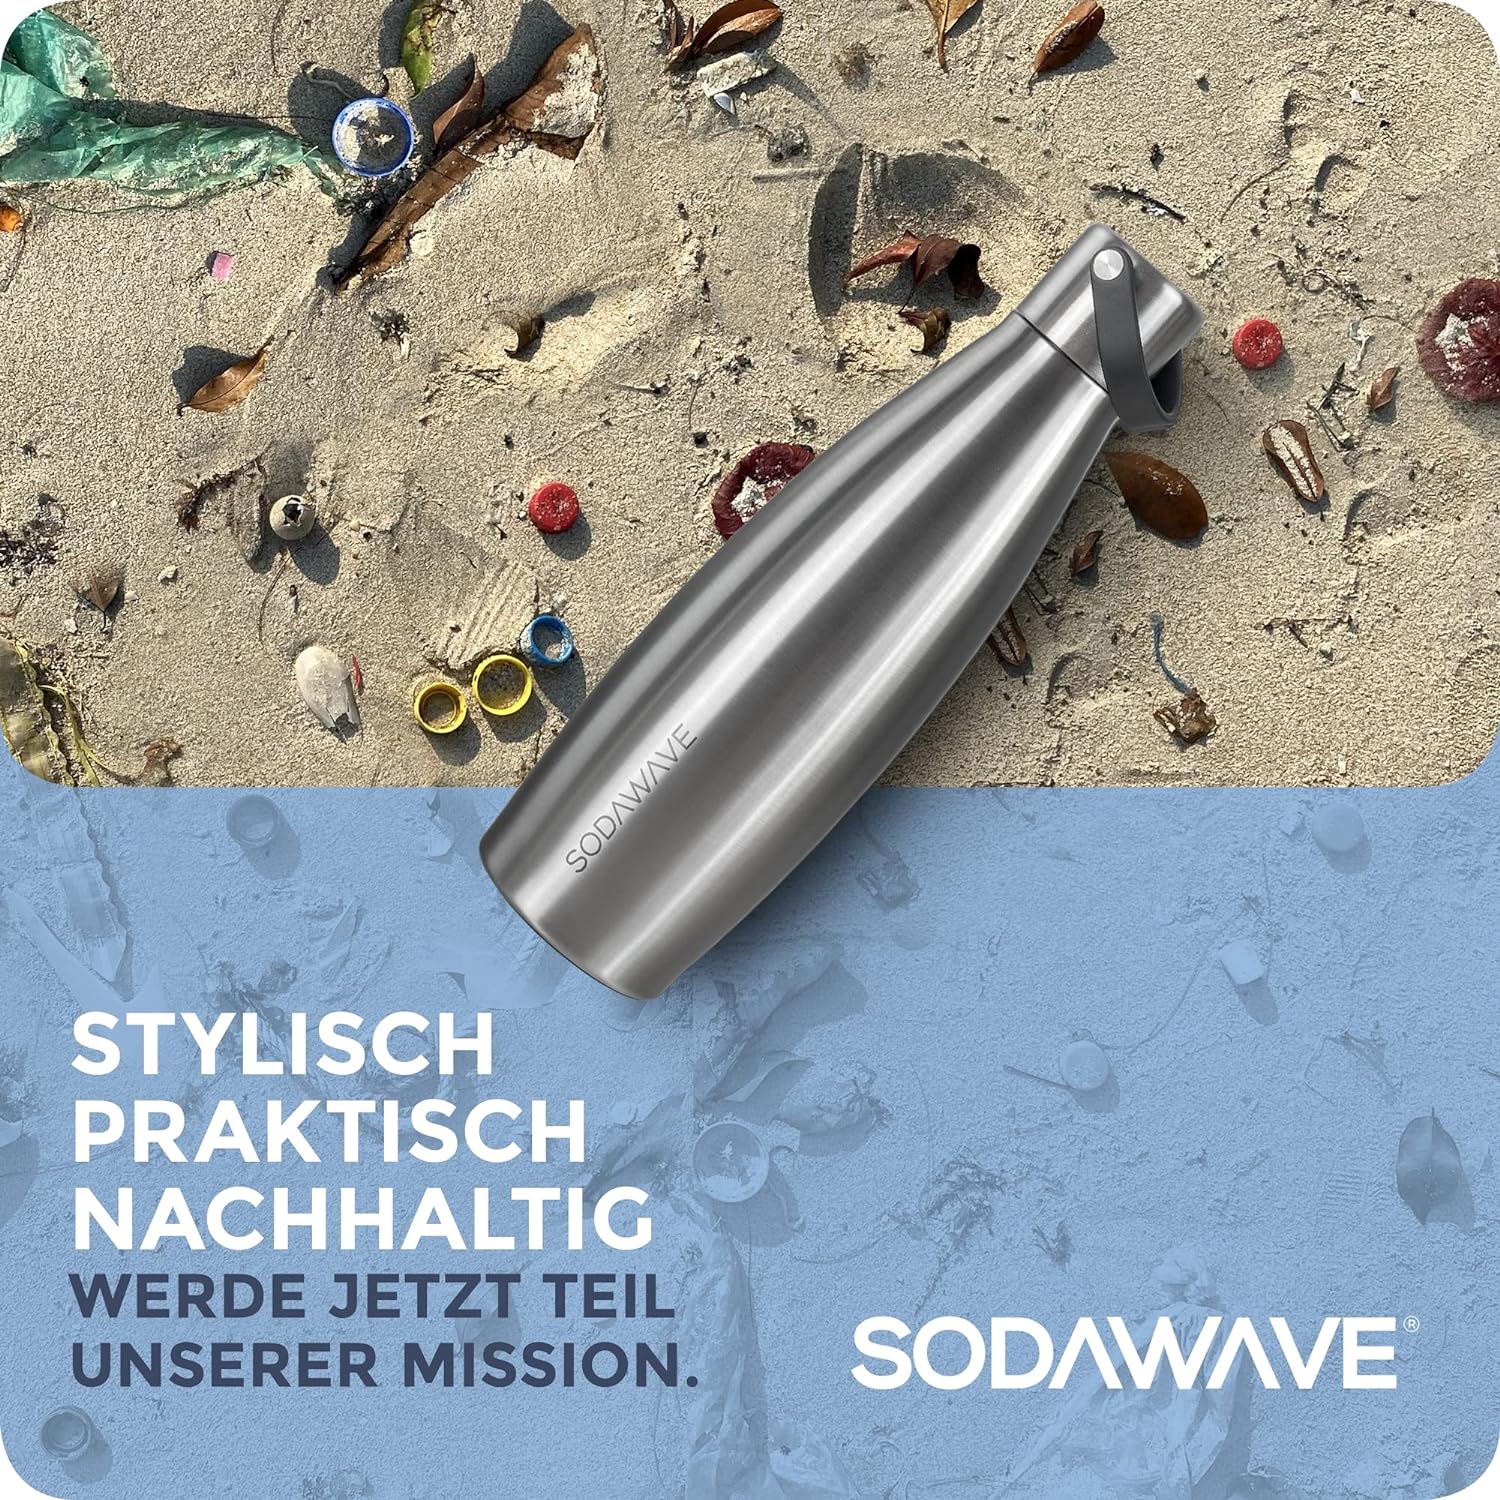 SODAWAVE® Stainless Steel Drinking Bottle [620 ml] Compatible with SodaStream Crystal I Double-Walled Thermal Stainless Steel Drinking Bottle I 100% Leak-Proof Bottle Ideal for Travel (Stainless